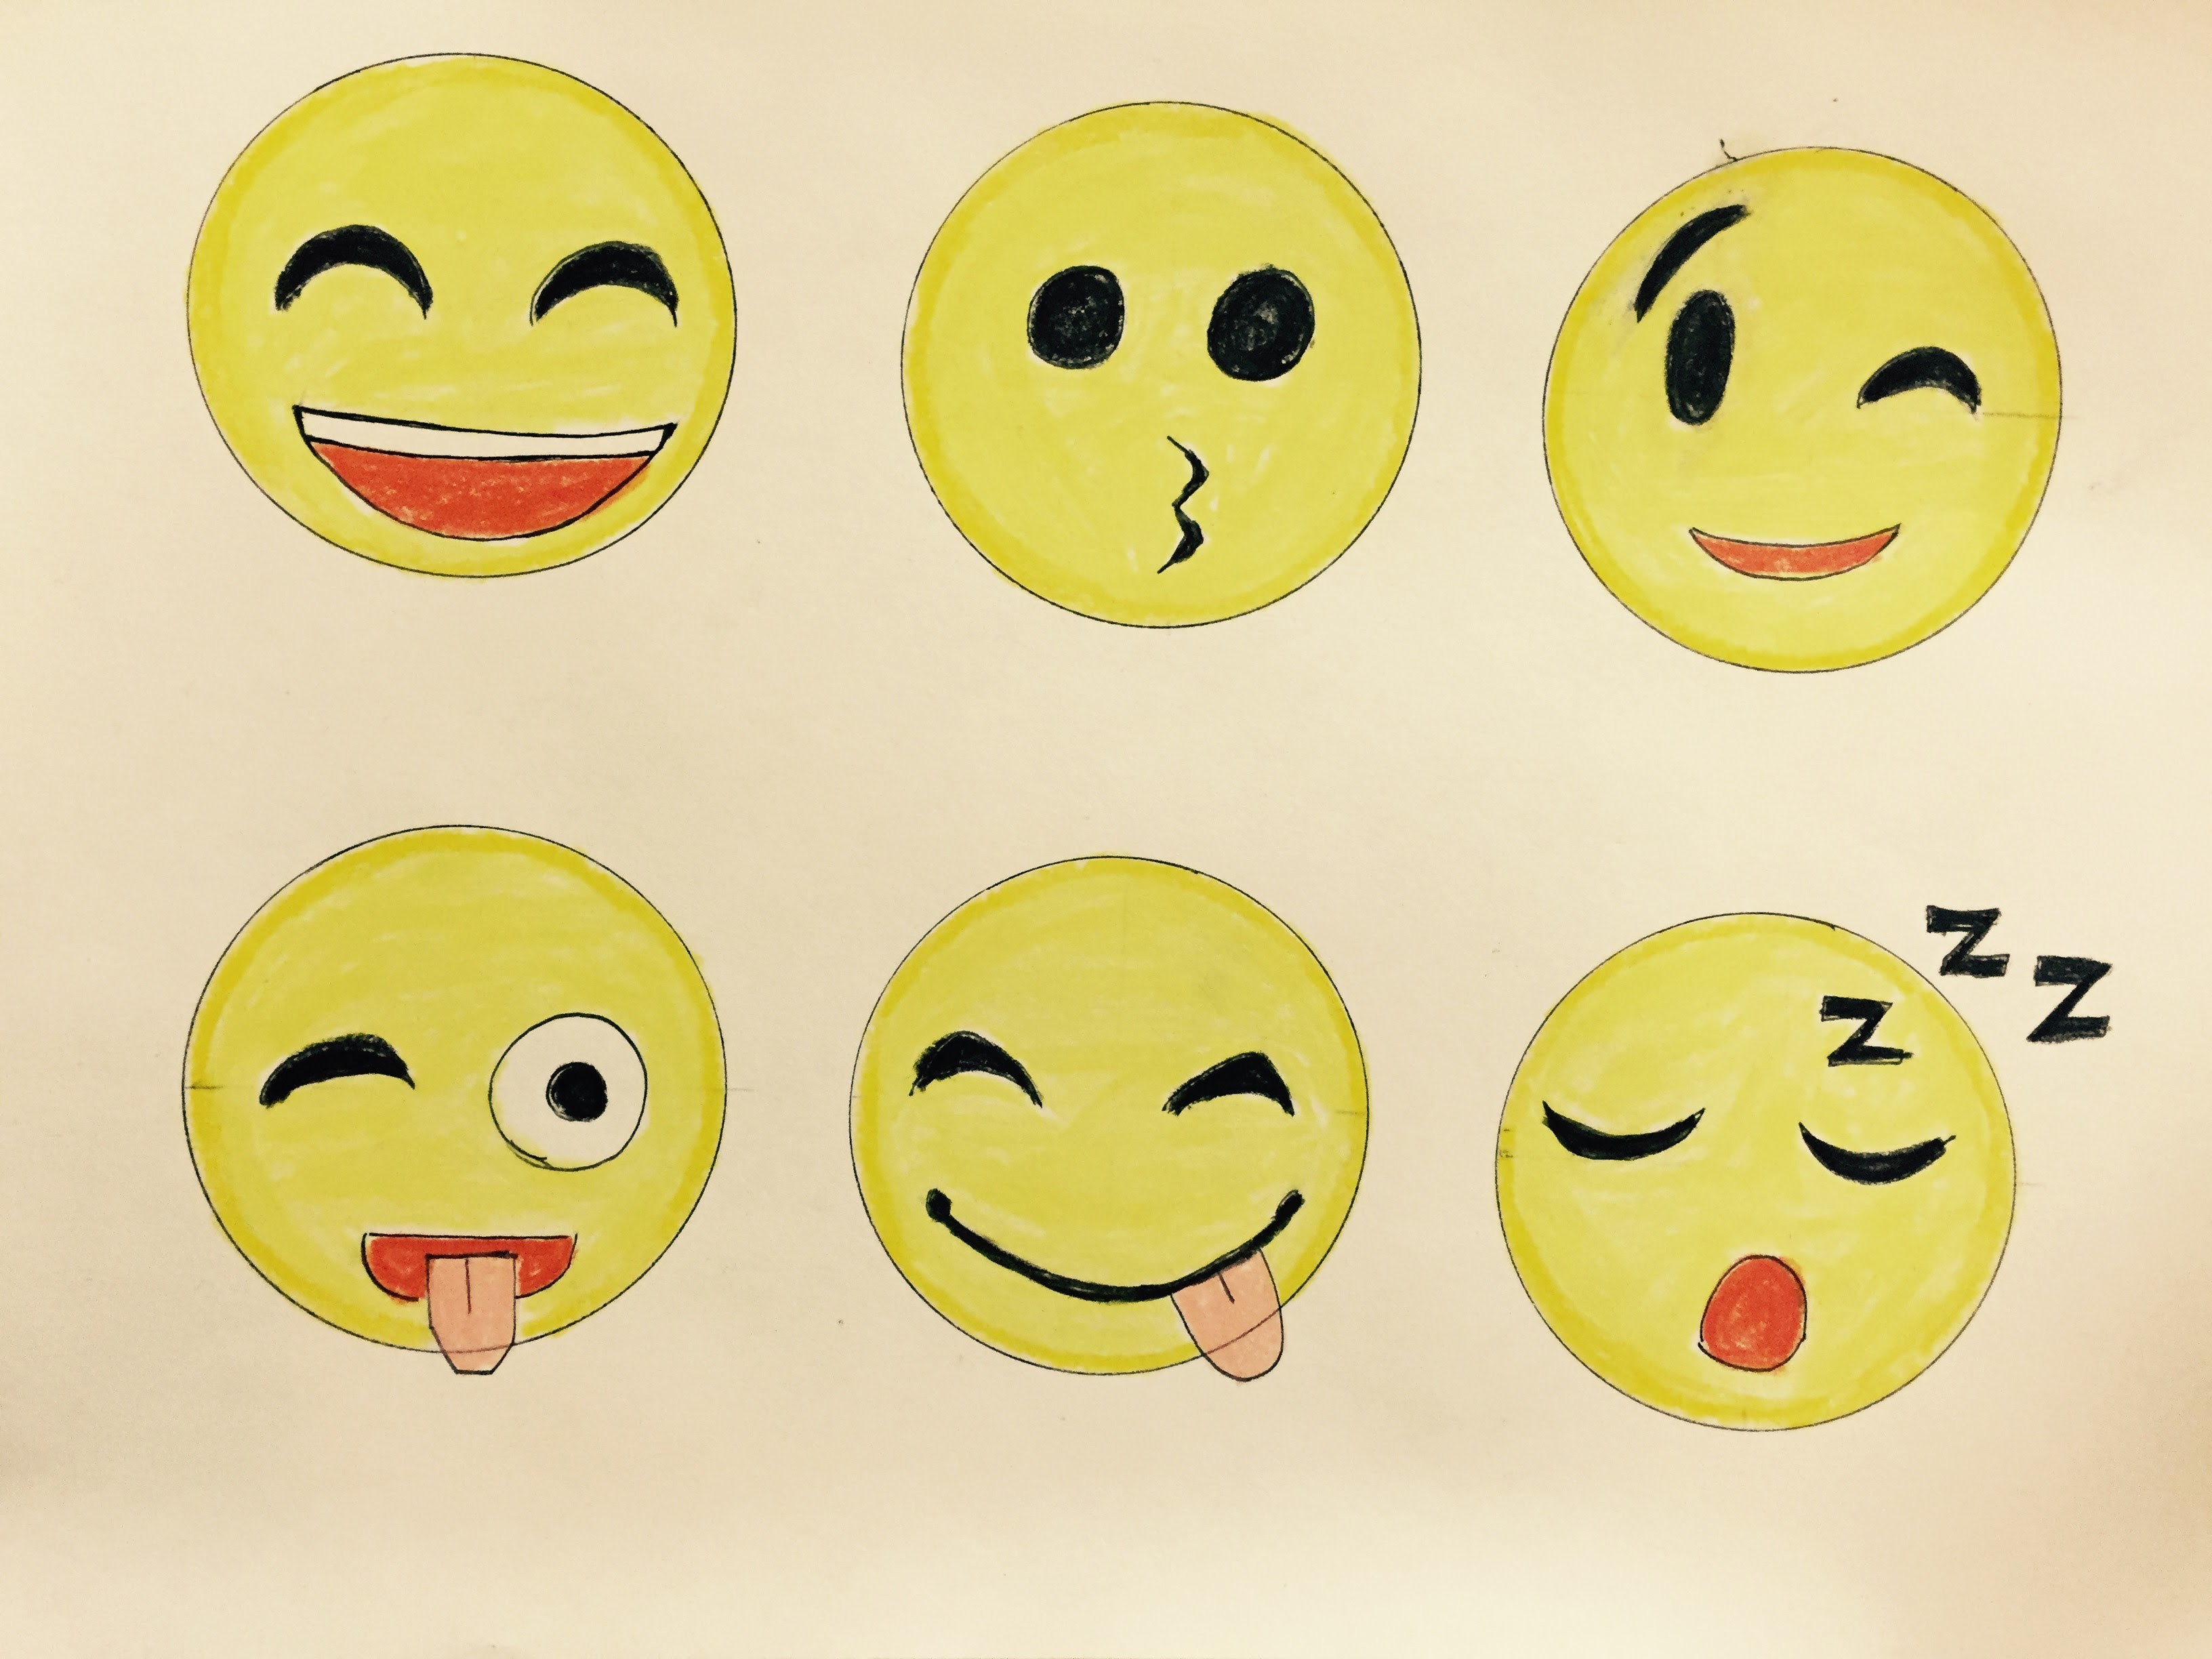 How to Draw Emojis: Step By Step Guide